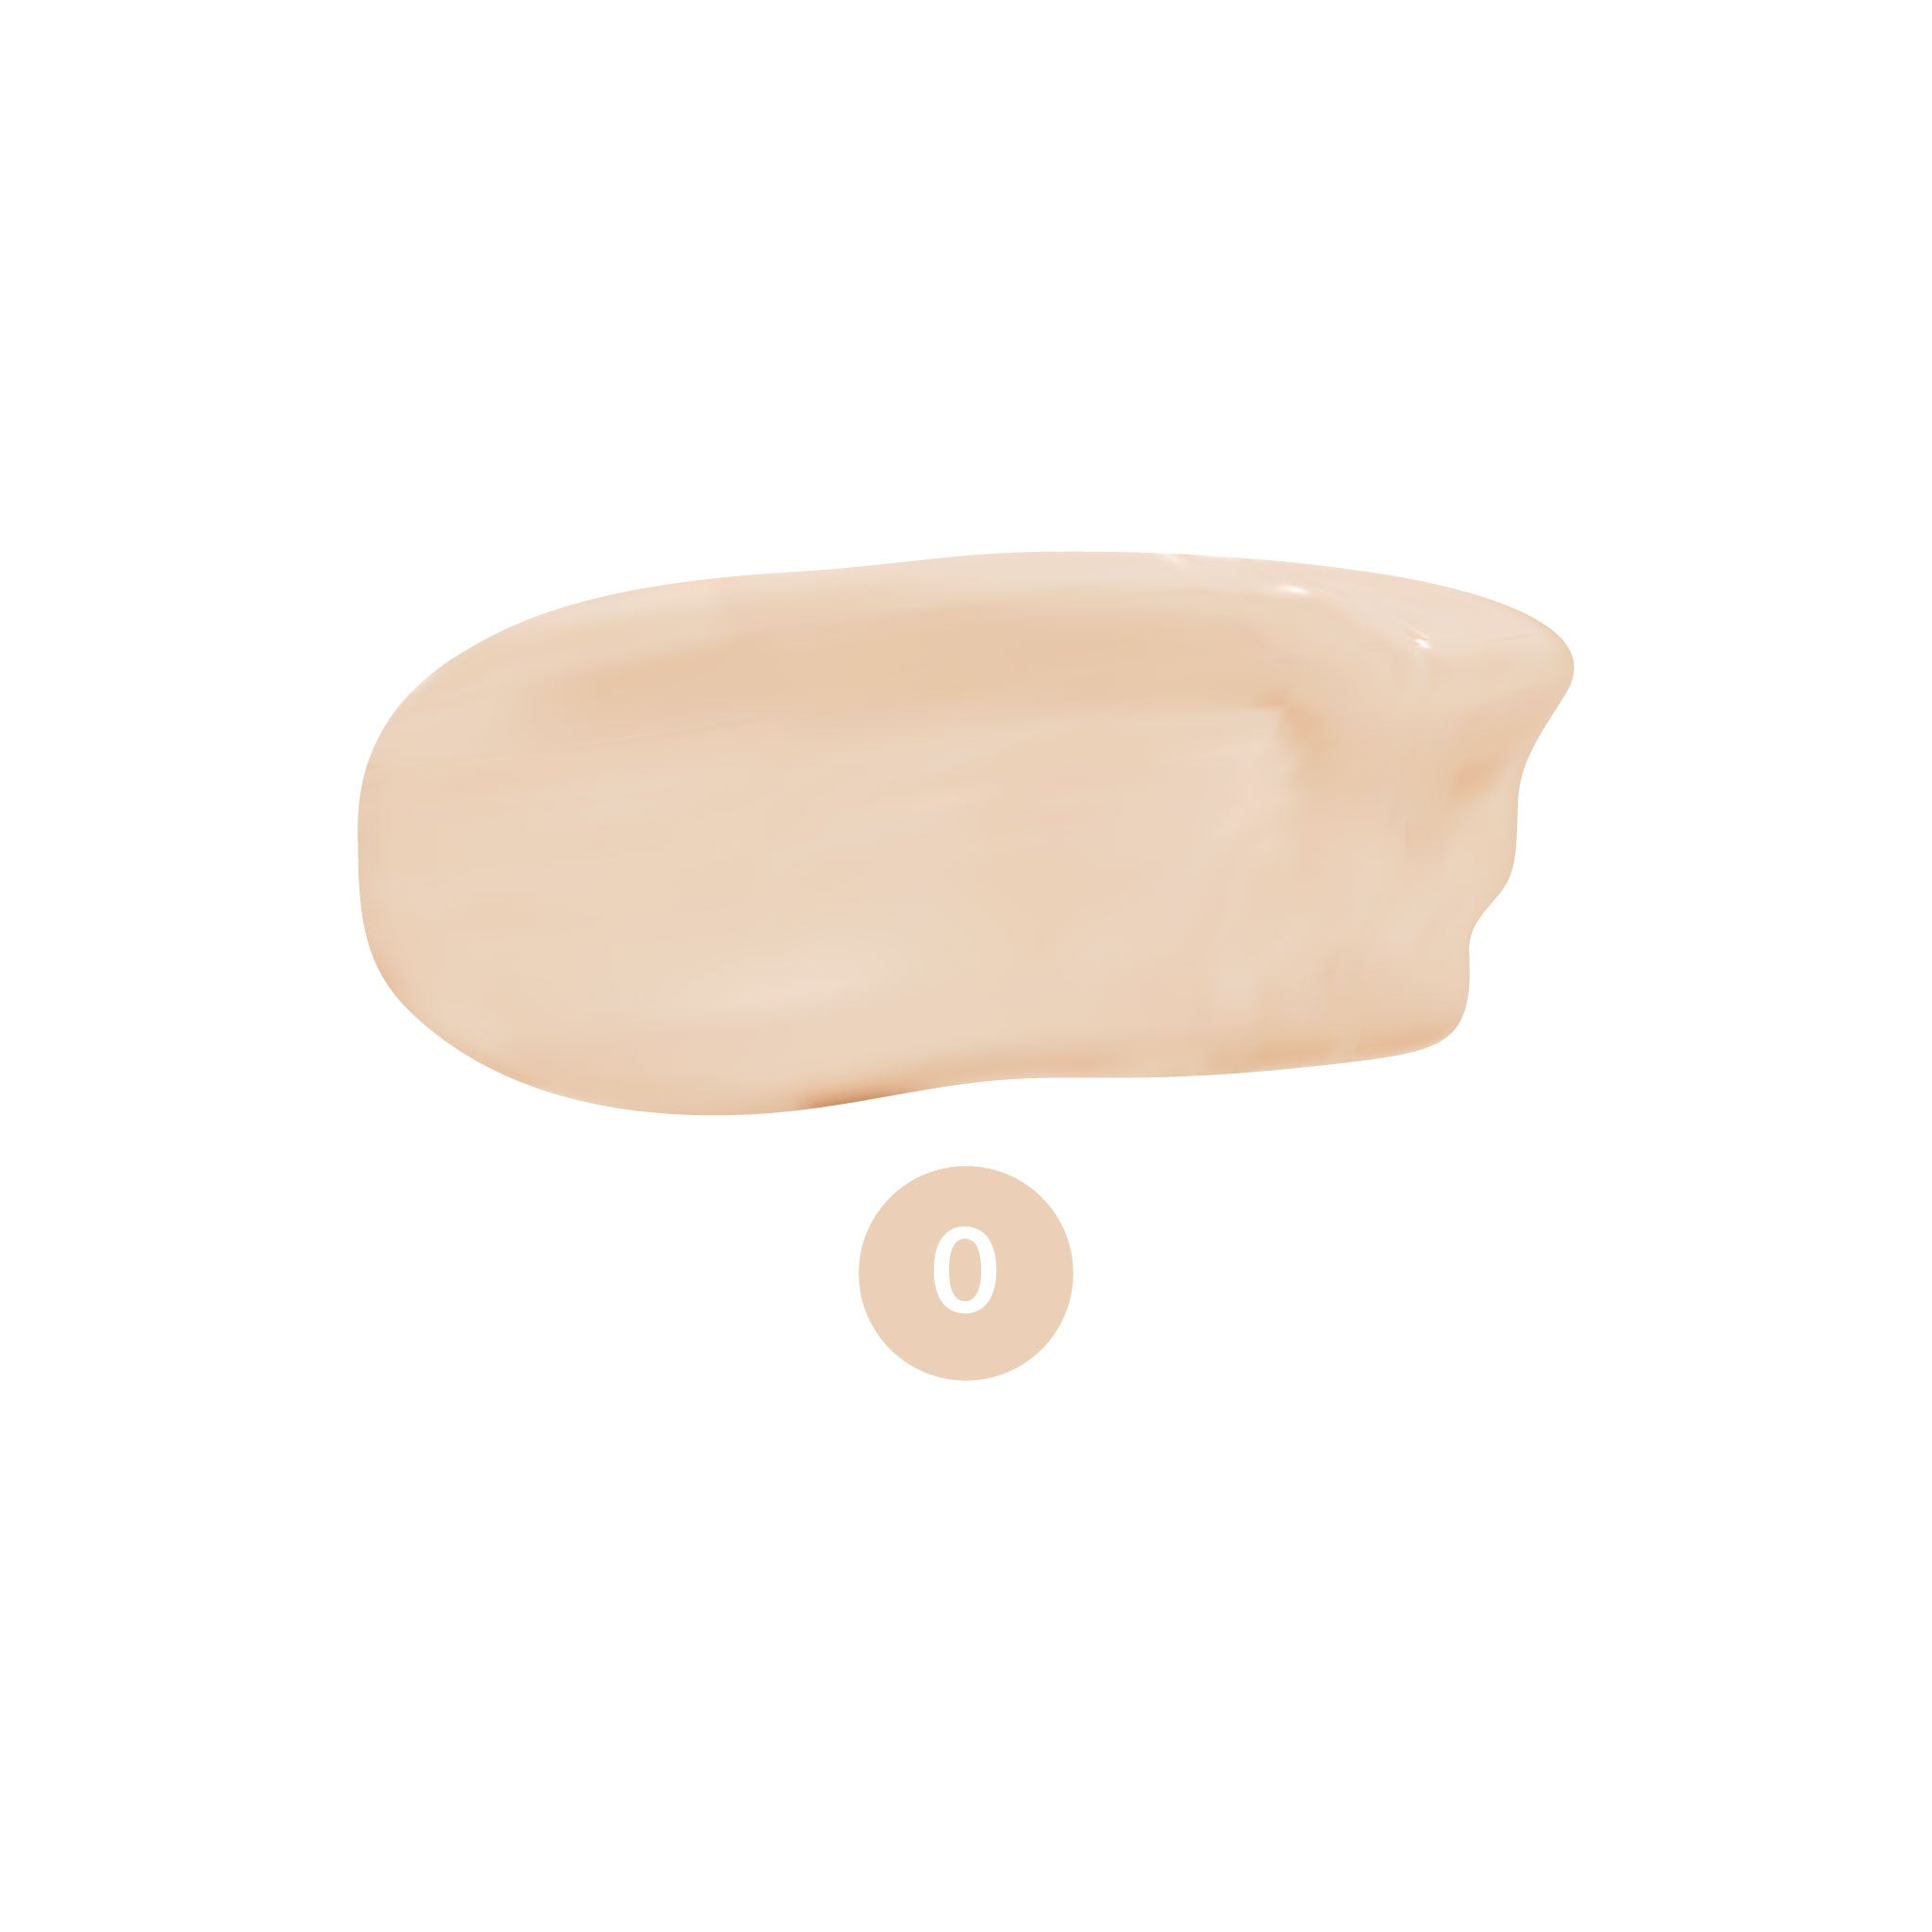 withSimplicity Liquid Foundation Swatch Shade 0